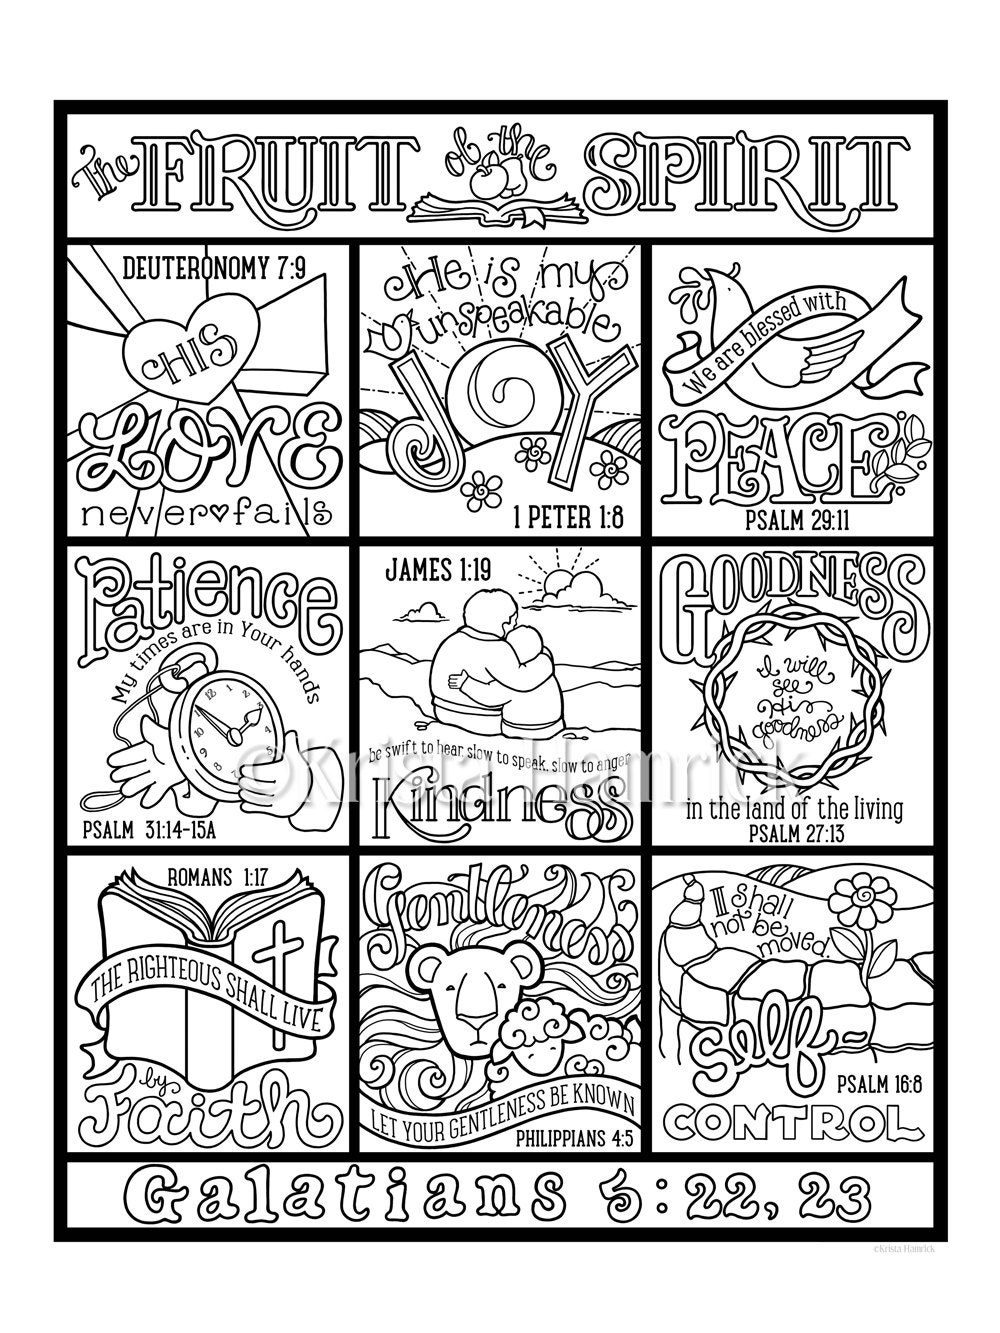 The Fruit of the Spirit coloring page in three sizes: 8 5X11